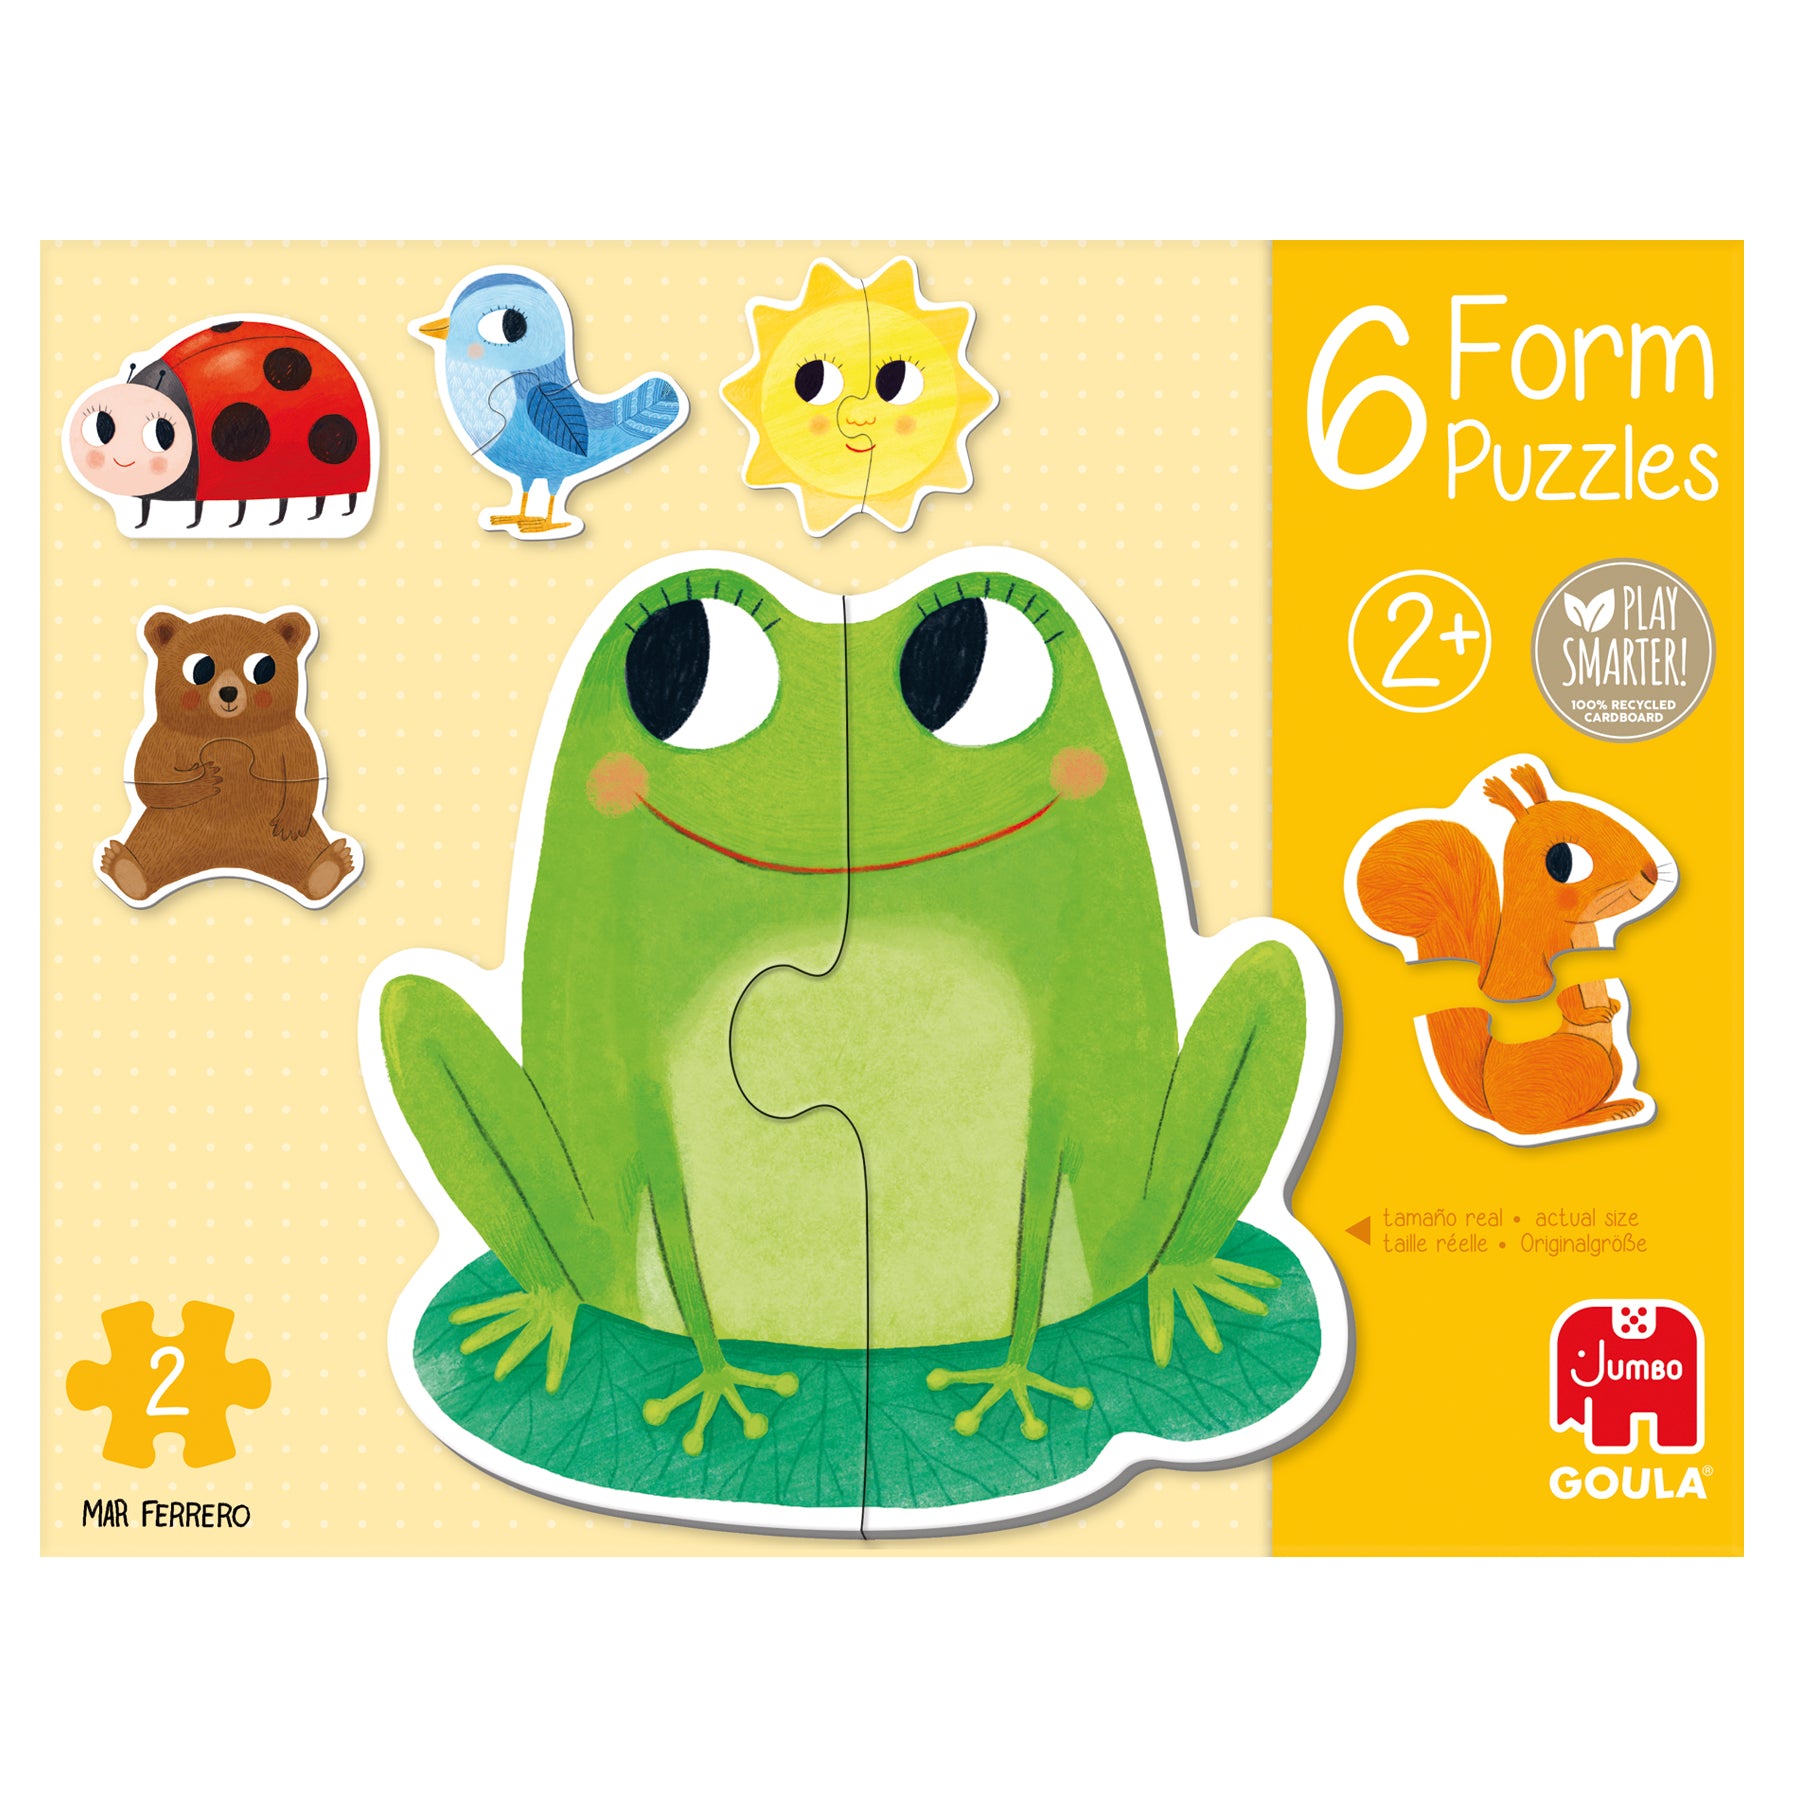 Form 6 puzzles - product image - Jumboplay.com